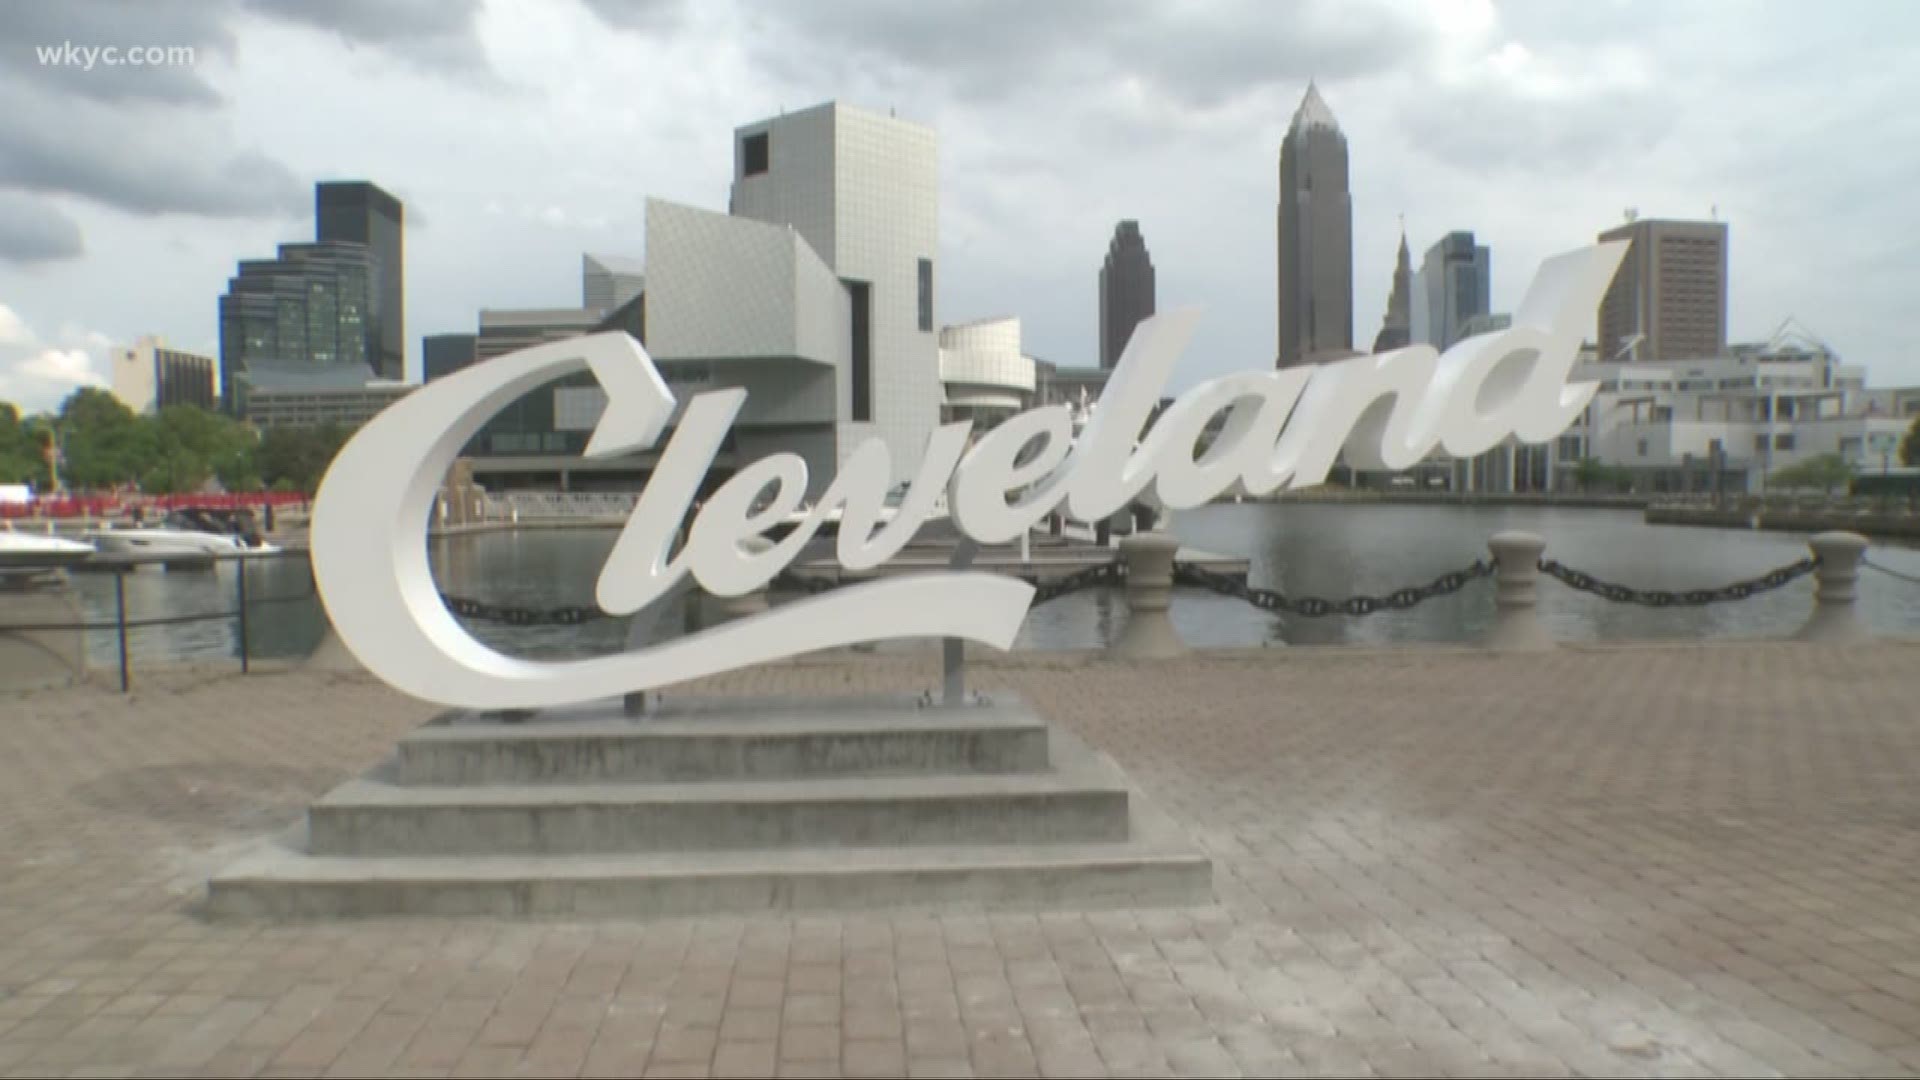 Cleveland to Chicago: New campaign wants to bring people back home